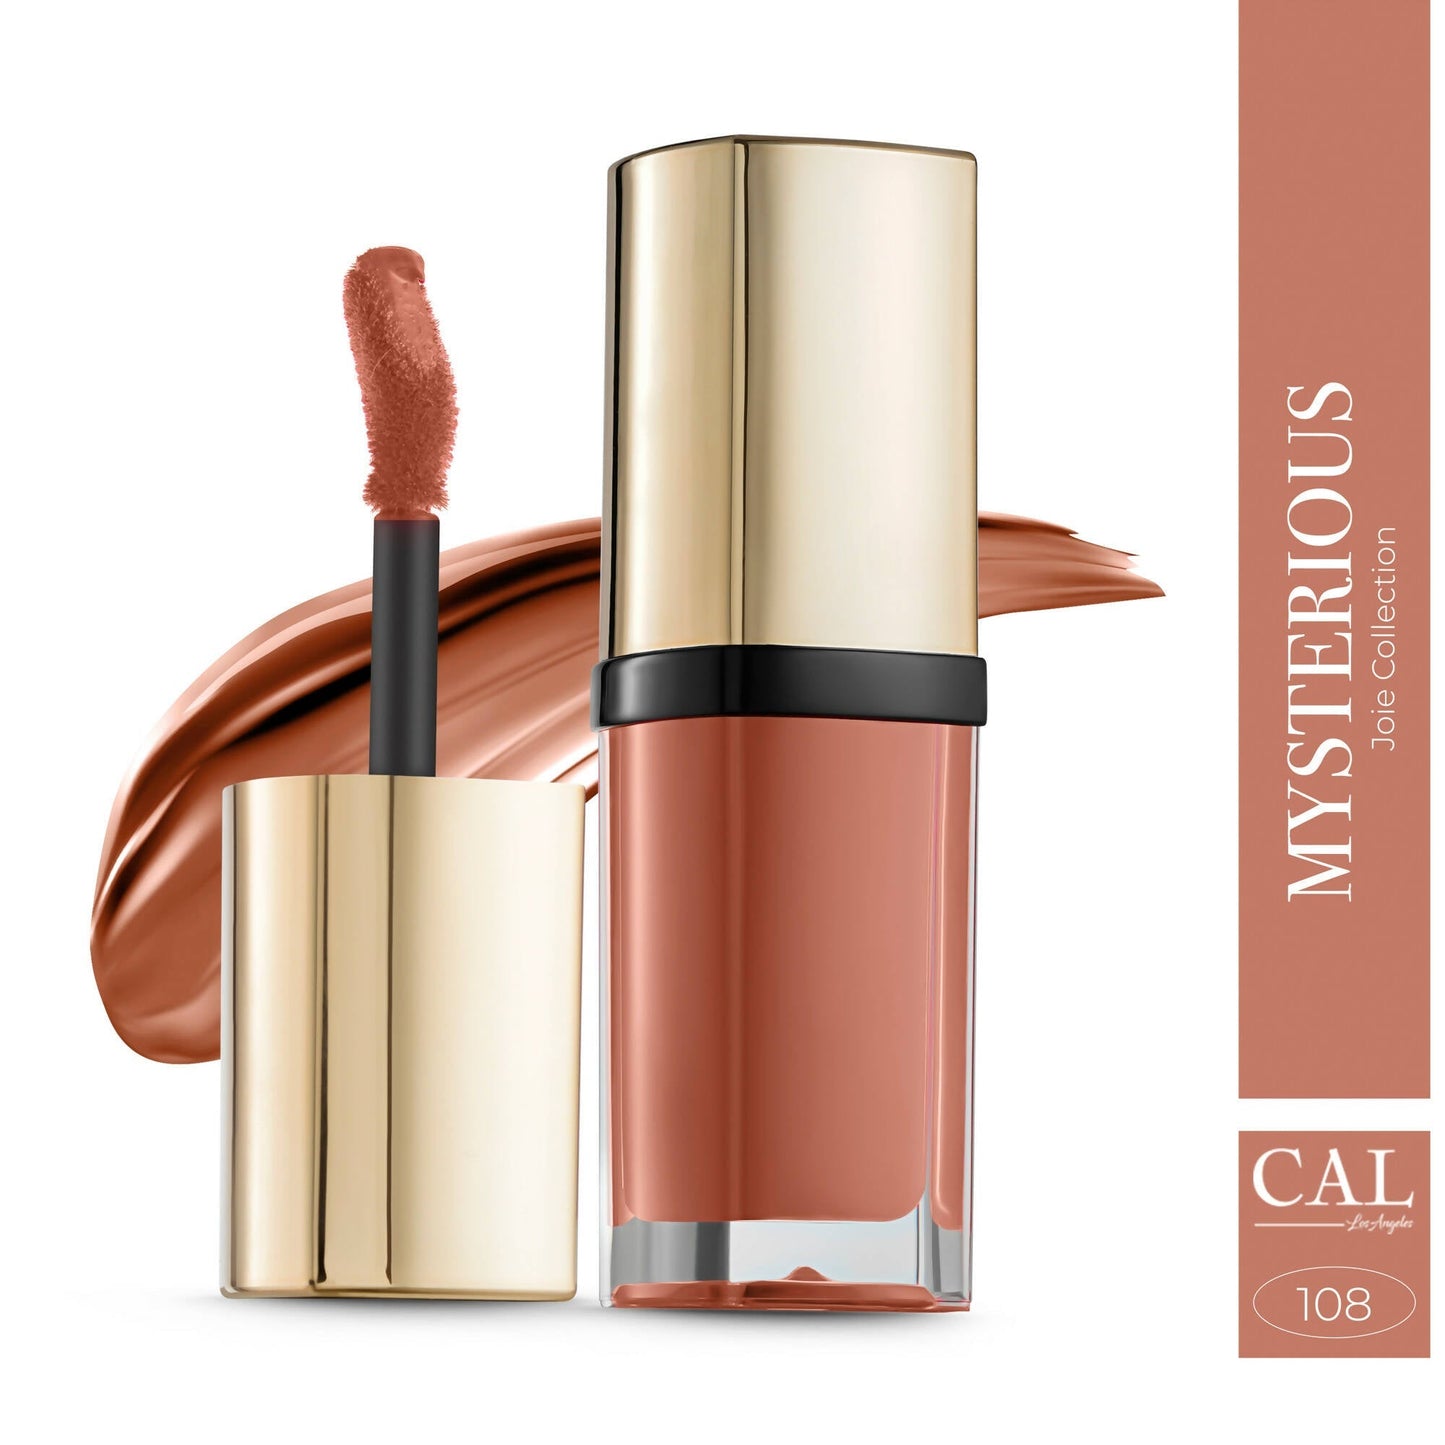 CAL Los Angeles Joie Collection Liquid Matte Bold Pink Lipstick - Mysterious 108